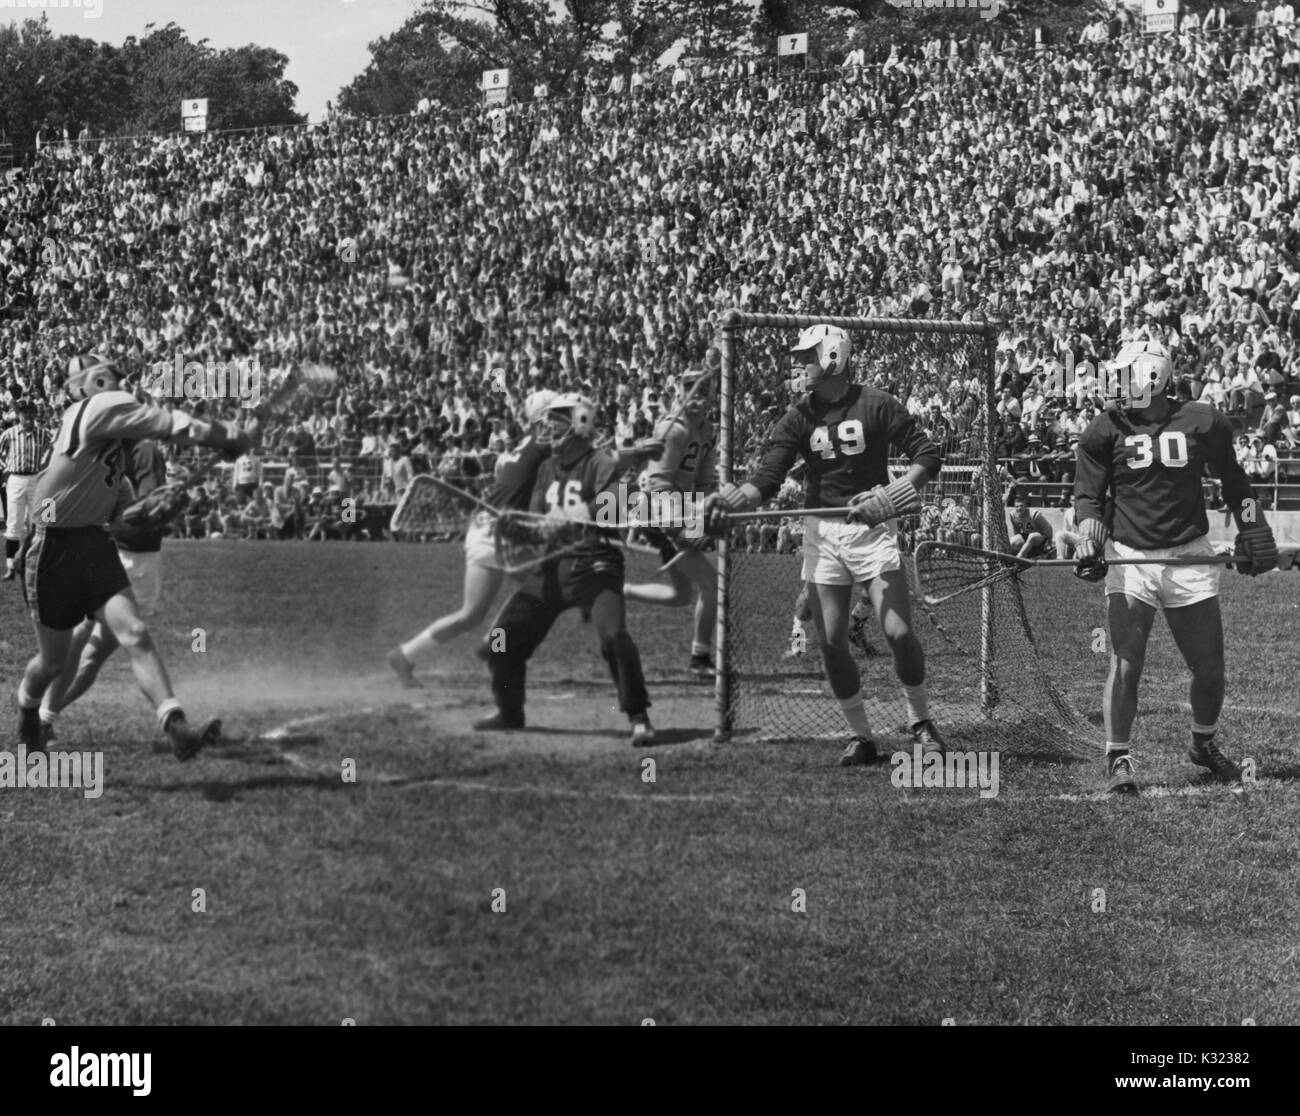 During a men's lacrosse game at Johns Hopkins University, a JHU player reaches to throw a powerful shot while members of the opposing team keep back for defense, in front of a sea of onlookers in the stands, Baltimore, Maryland, June, 1951. Stock Photo